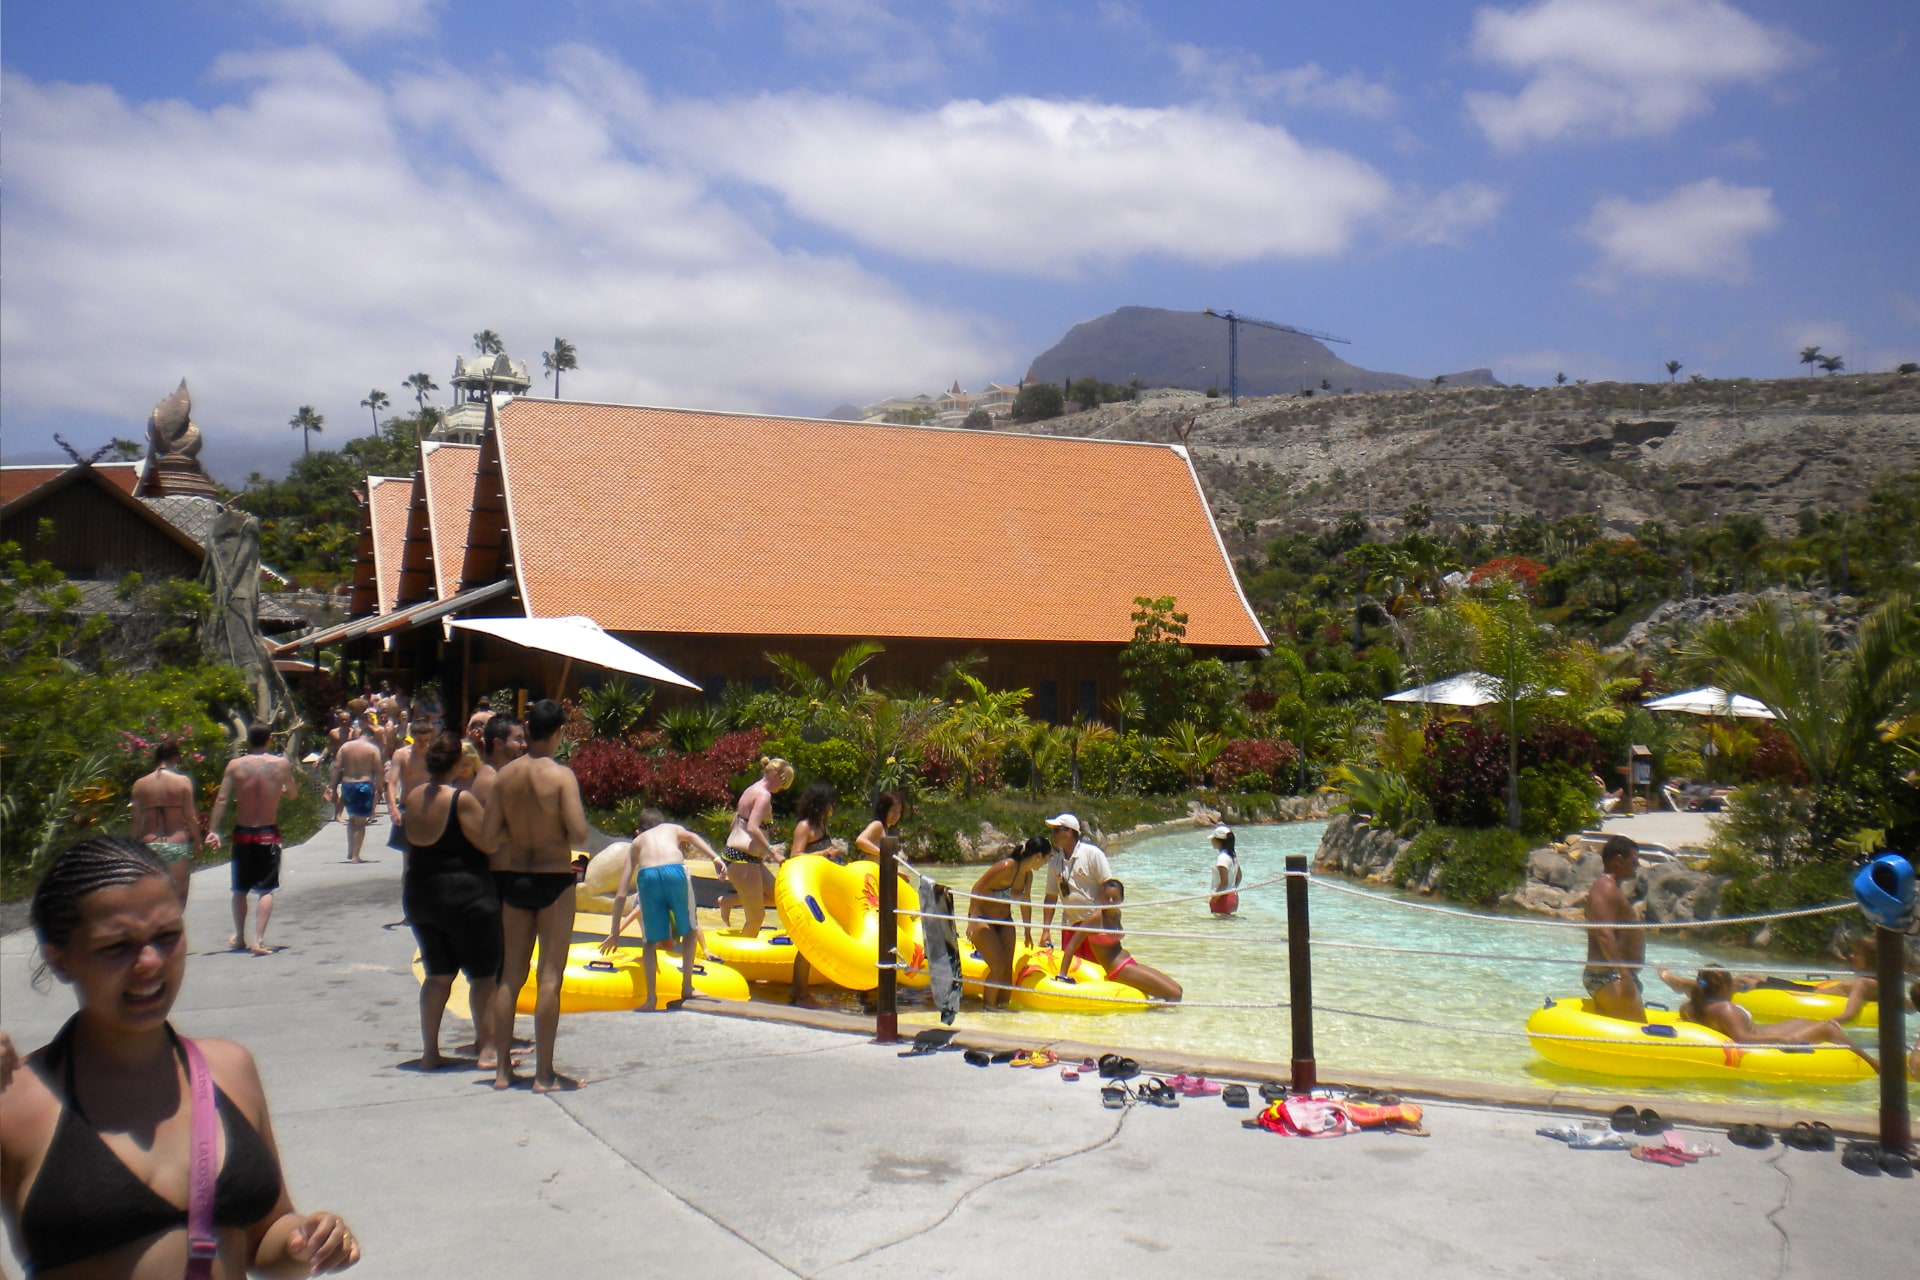 Starting point of the lazy river at Siam Park, Tenerife, offering a relaxing water ride